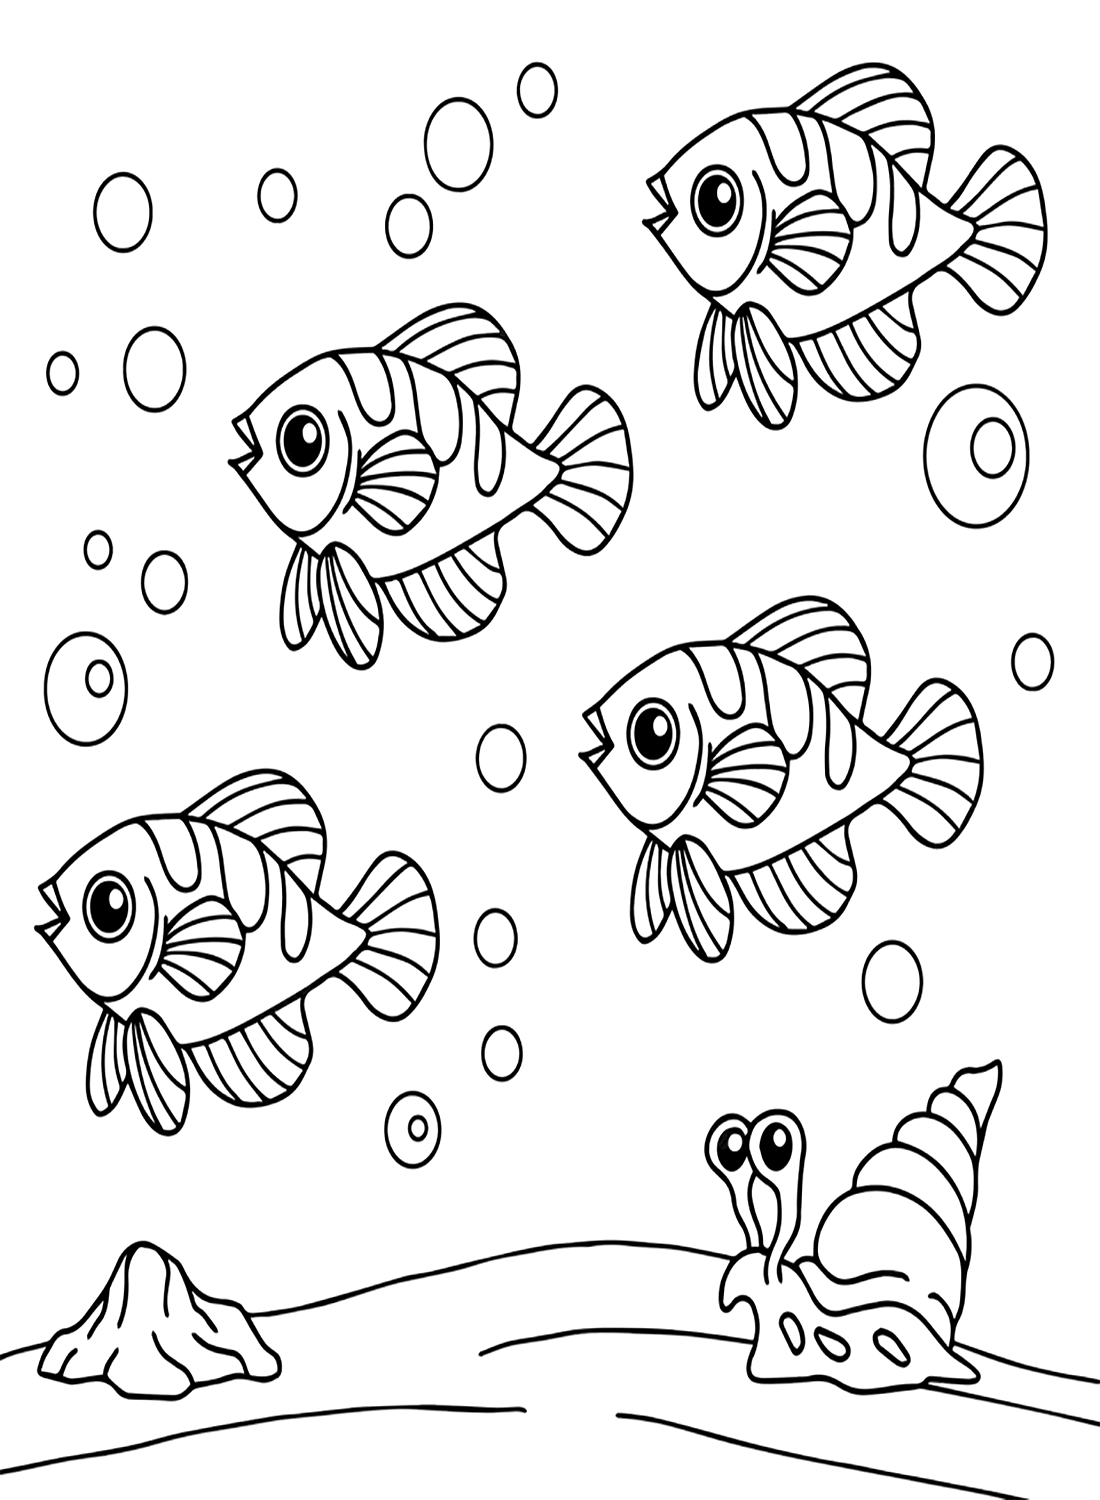 Easy Crayola Coloring Pages - Free Printable Coloring Pages